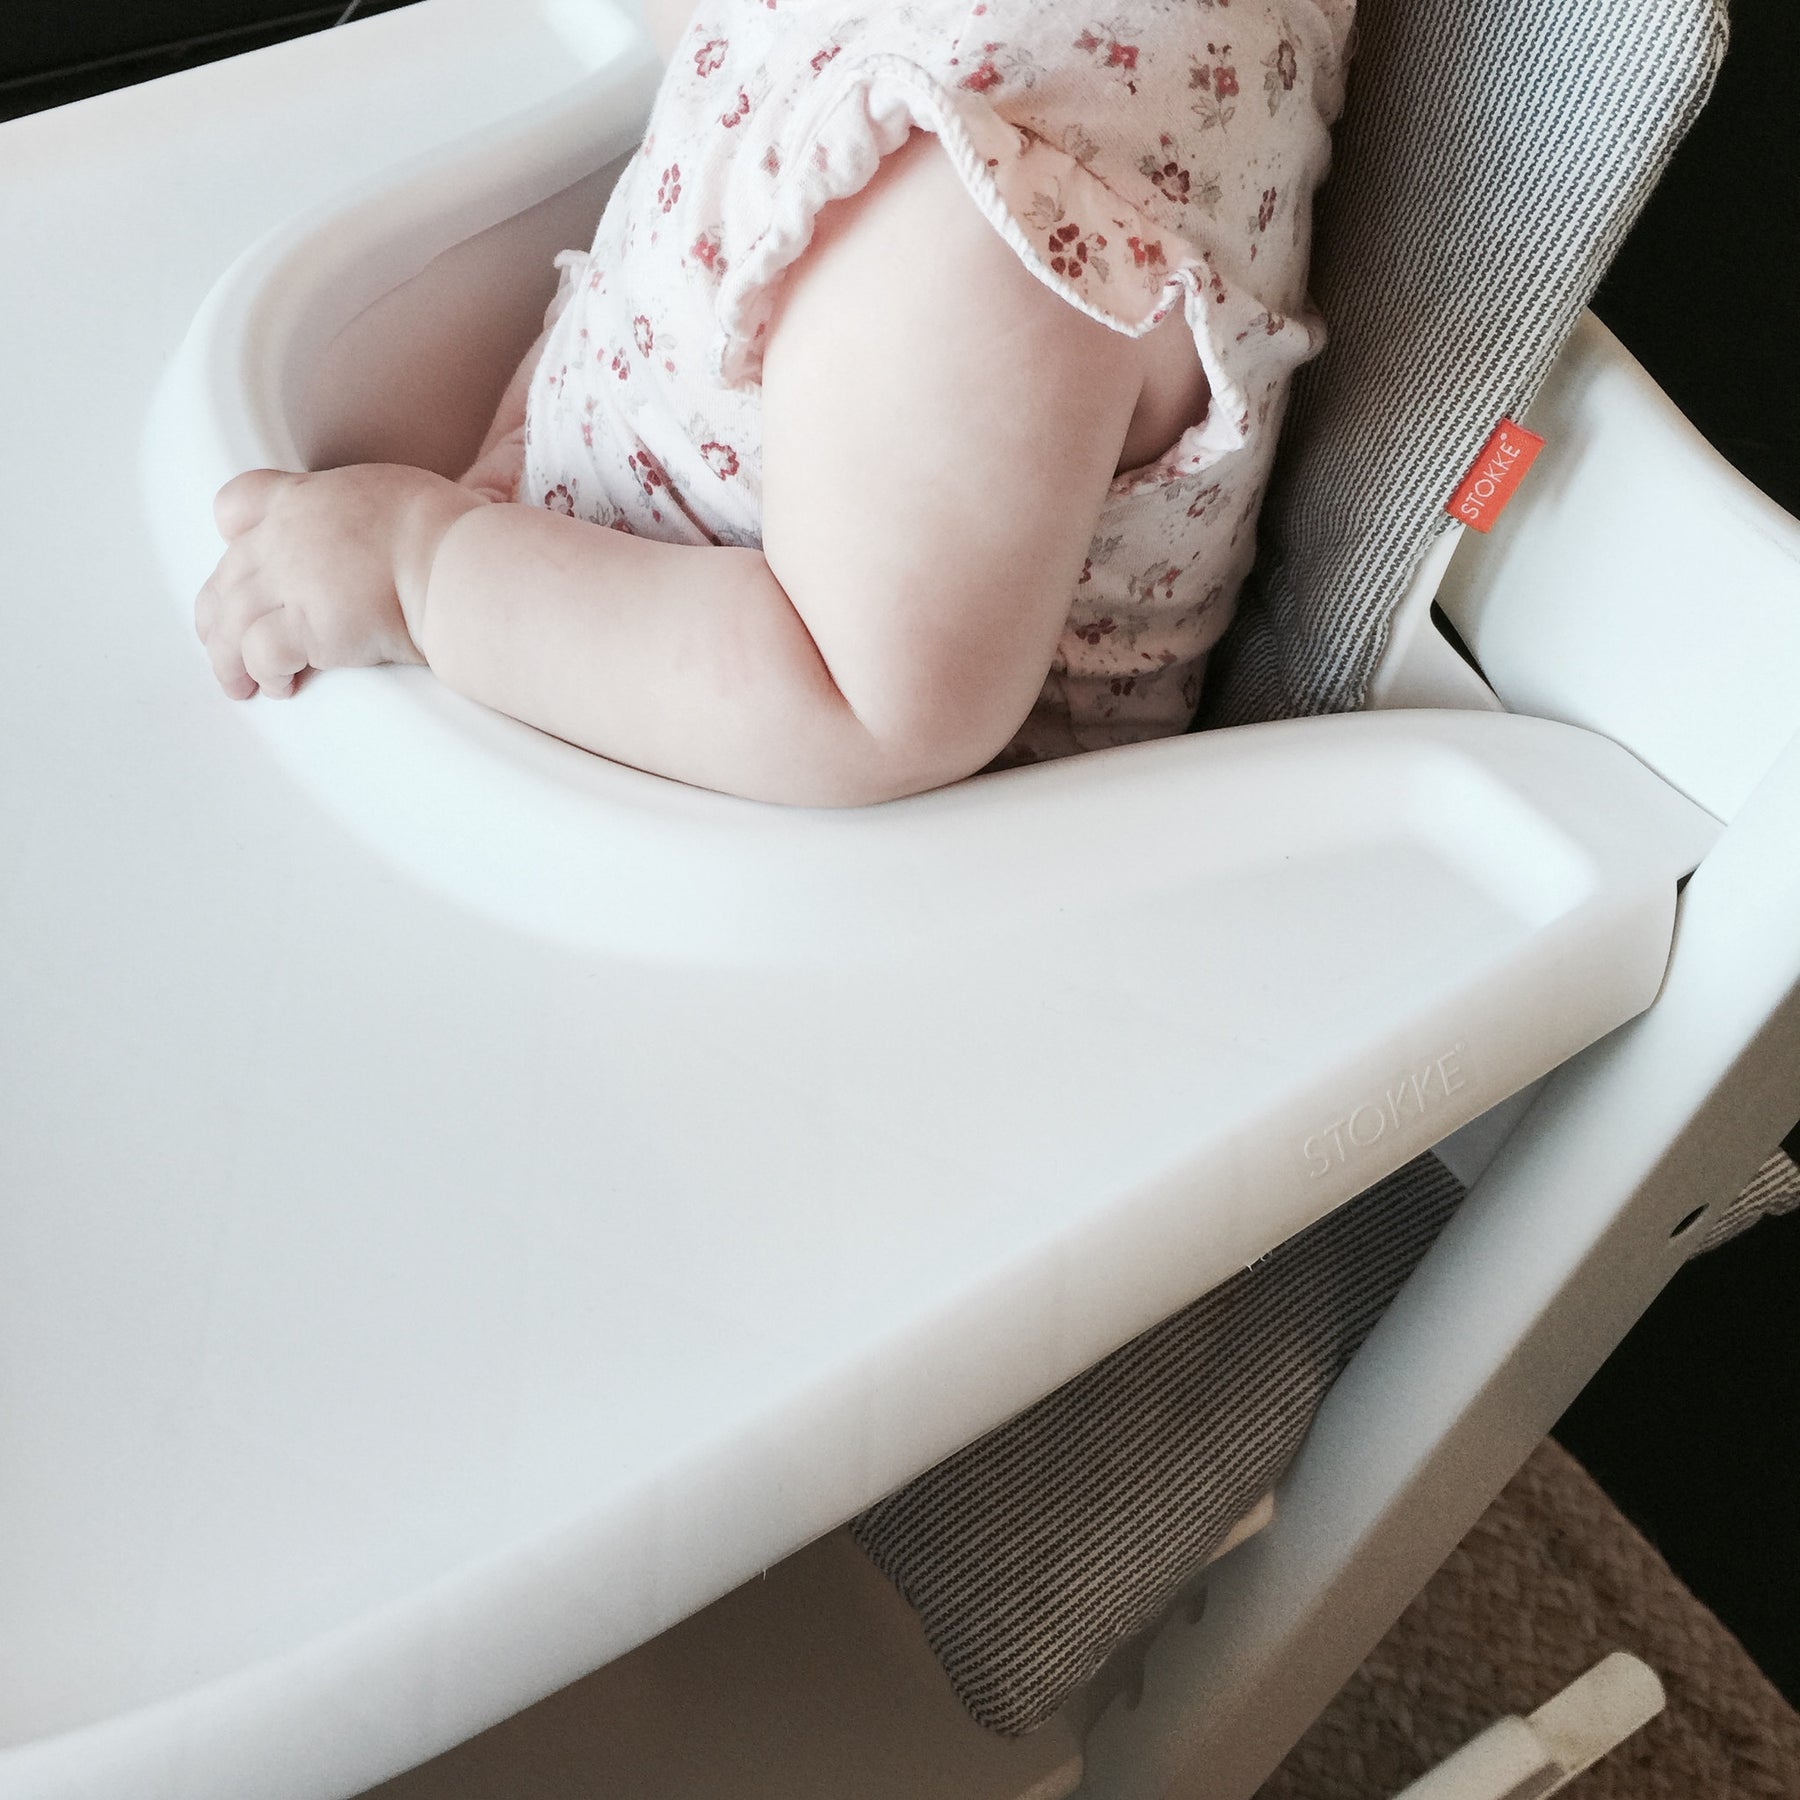 a baby sitting in her high chair waiting to discover what new delicious food her mom will be feeding her.